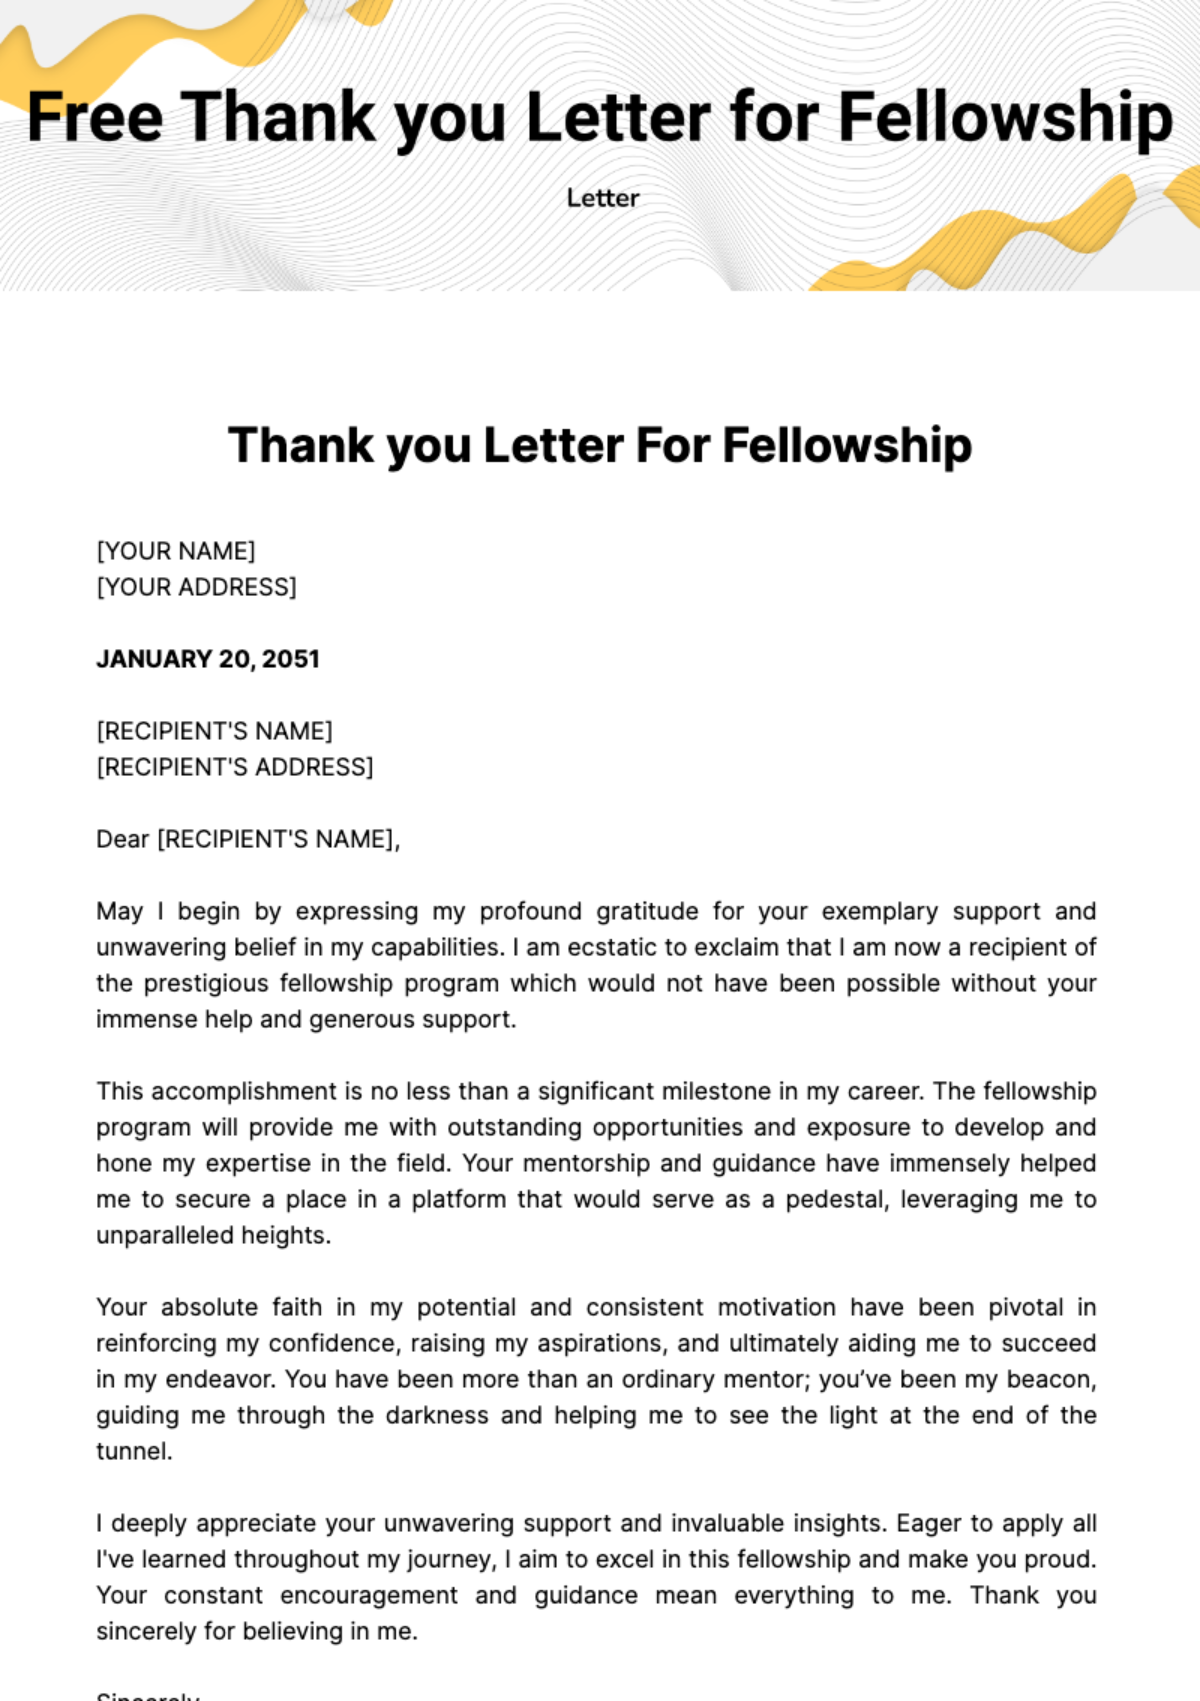 Free Thank you Letter for Fellowship Template